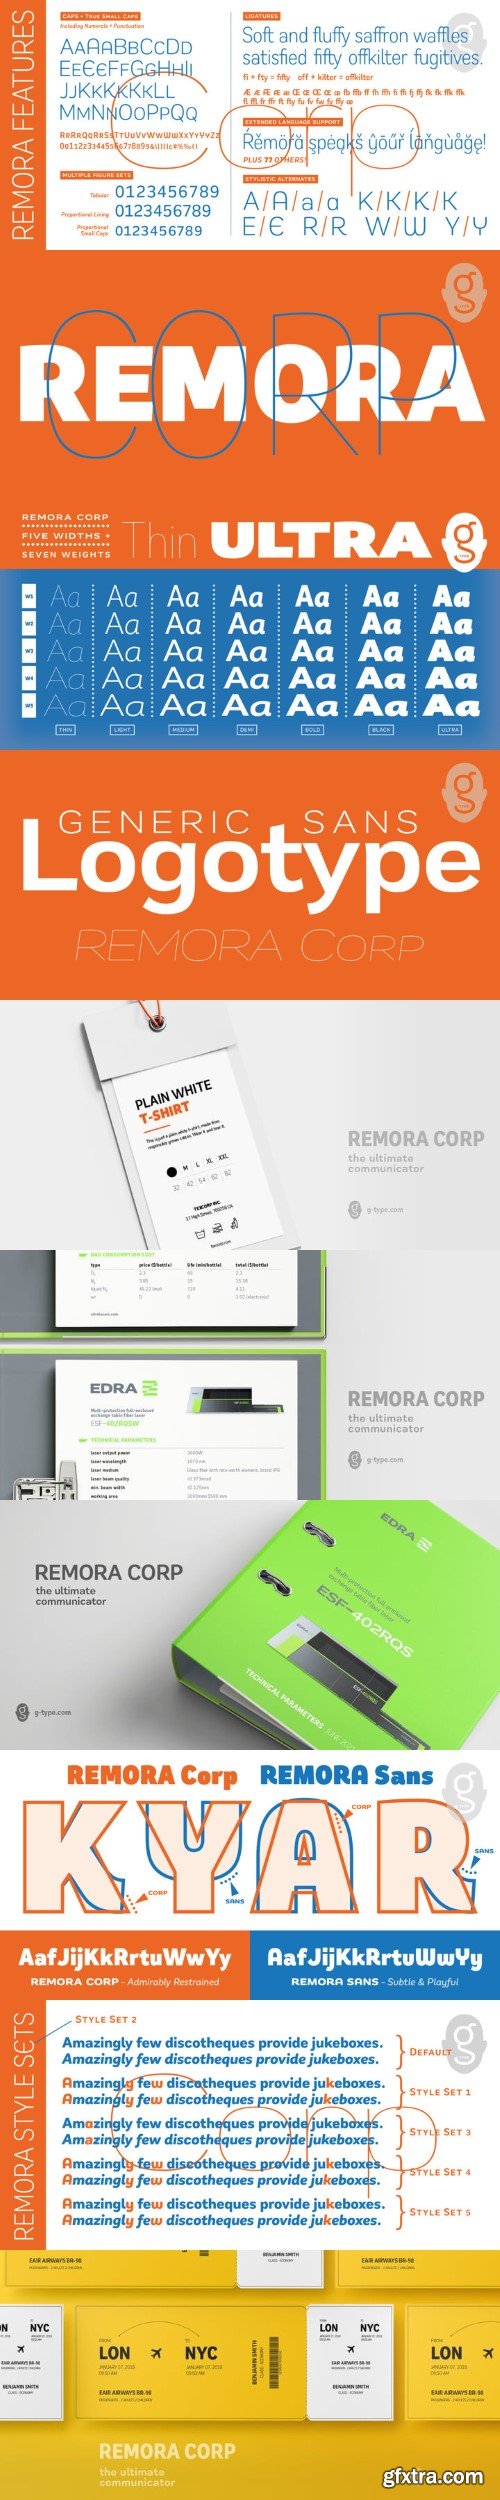 Remora Corp Complete Font Family (70 Fonts)